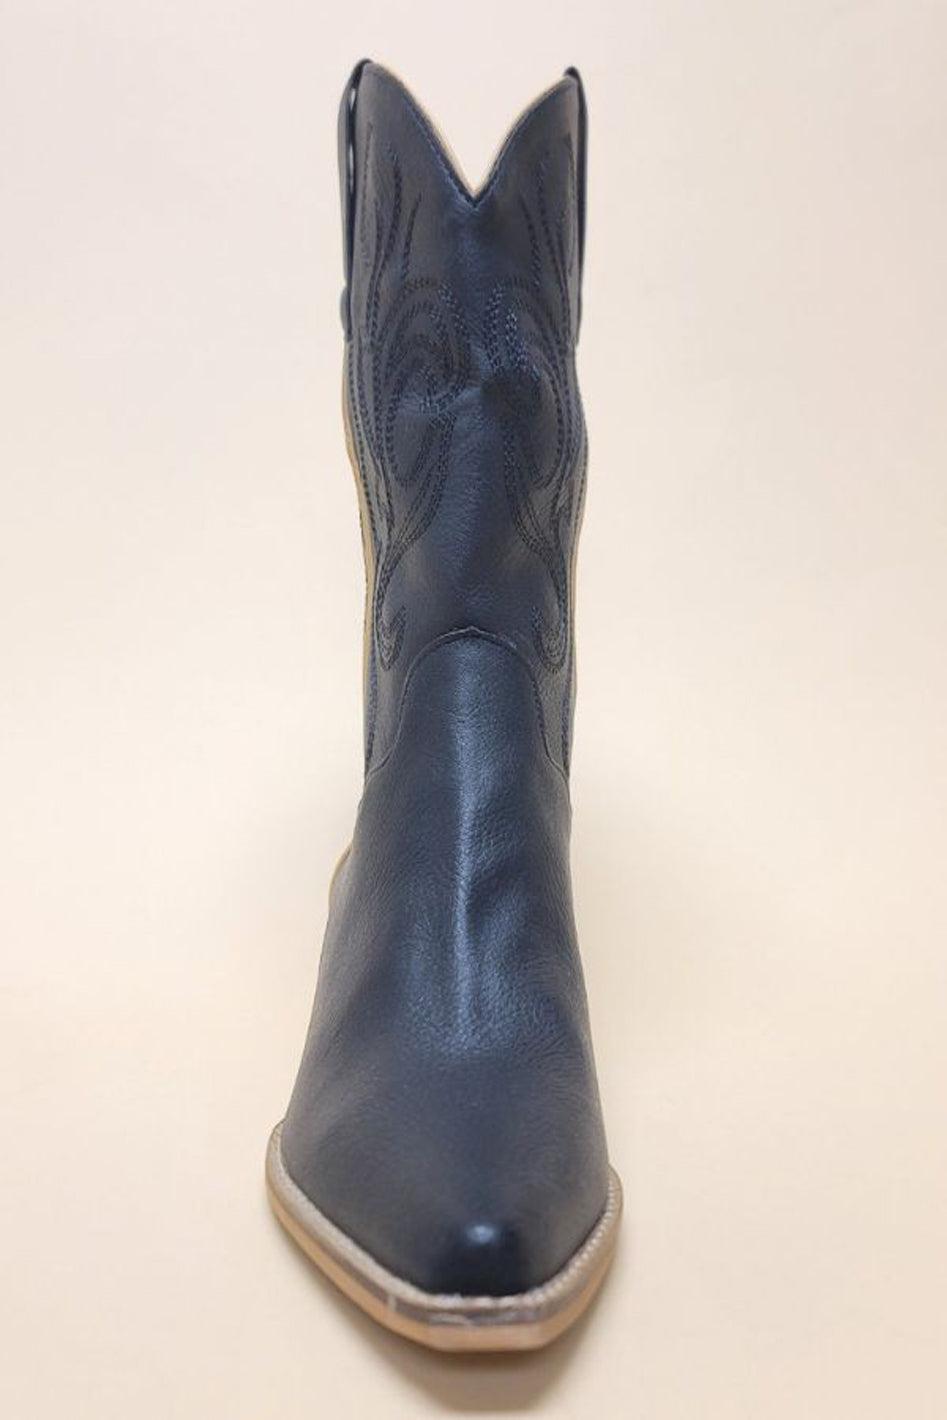 SPINDELLE-WESTERN BOOTS - Azoroh